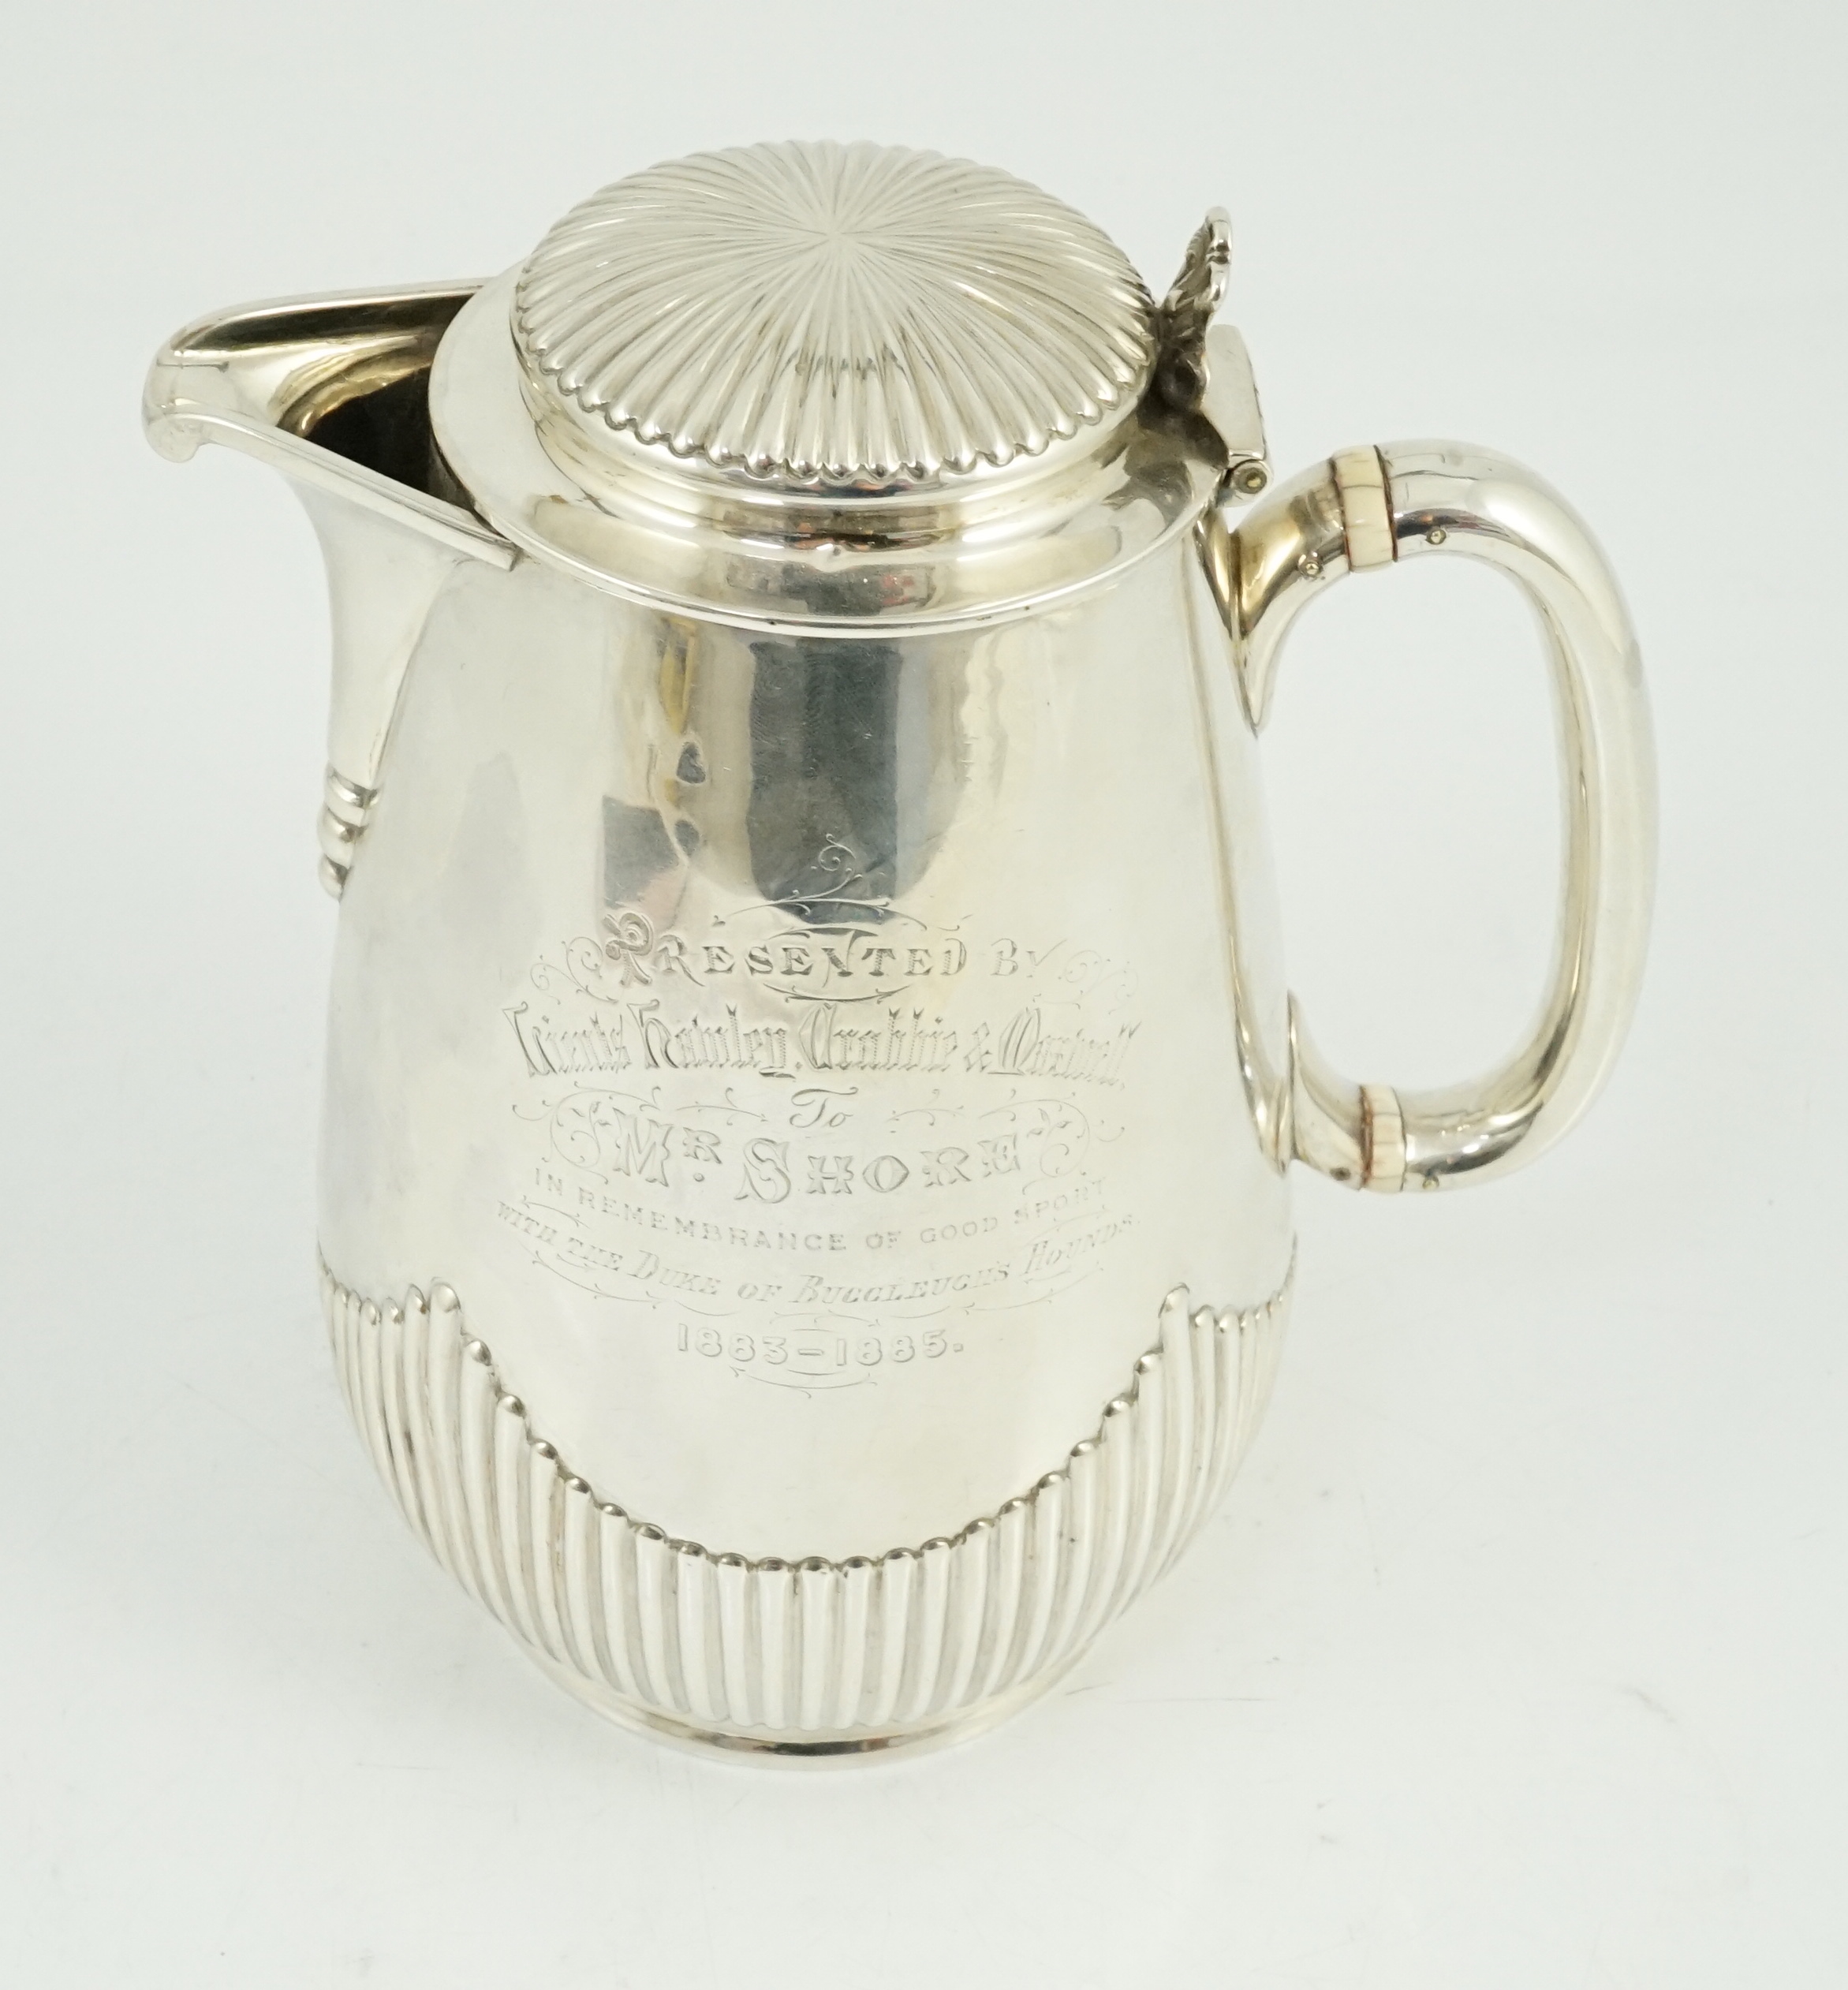 The Royal Scots Greys. A Victorian Scottish silver hotwater pot, Hamilton & Inches, Edinburgh, 1882, - Image 6 of 8